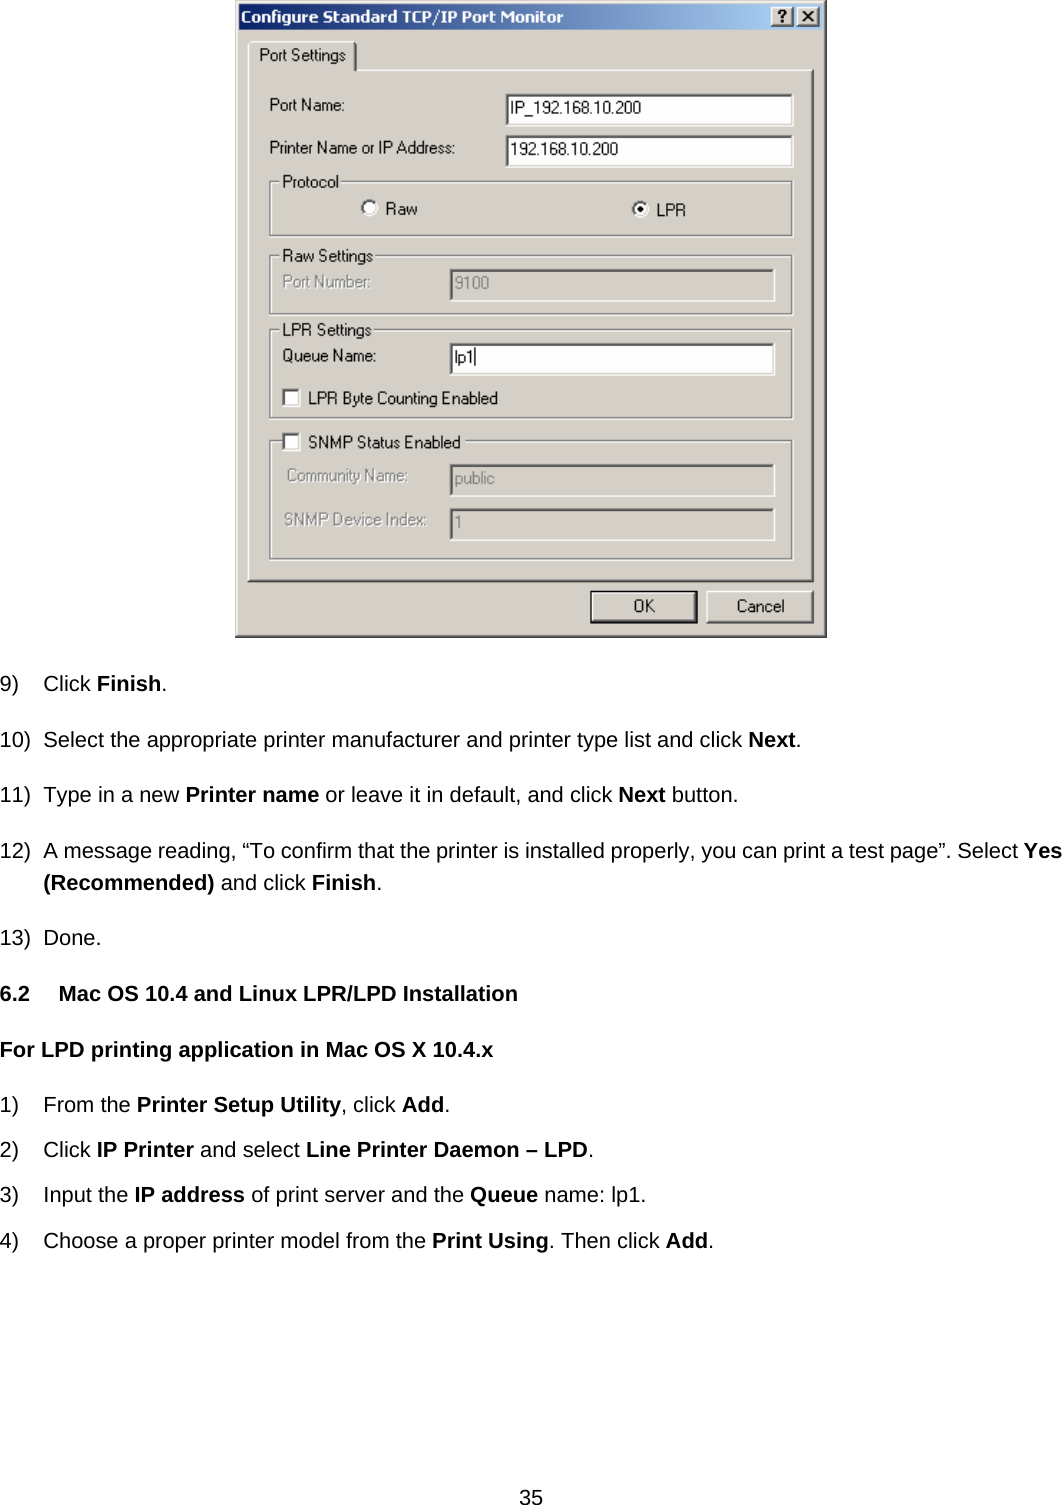  35   9) Click Finish. 10)  Select the appropriate printer manufacturer and printer type list and click Next. 11)  Type in a new Printer name or leave it in default, and click Next button. 12)  A message reading, “To confirm that the printer is installed properly, you can print a test page”. Select Yes (Recommended) and click Finish. 13) Done. 6.2  Mac OS 10.4 and Linux LPR/LPD Installation For LPD printing application in Mac OS X 10.4.x 1) From the Printer Setup Utility, click Add. 2) Click IP Printer and select Line Printer Daemon – LPD. 3) Input the IP address of print server and the Queue name: lp1. 4)  Choose a proper printer model from the Print Using. Then click Add. 